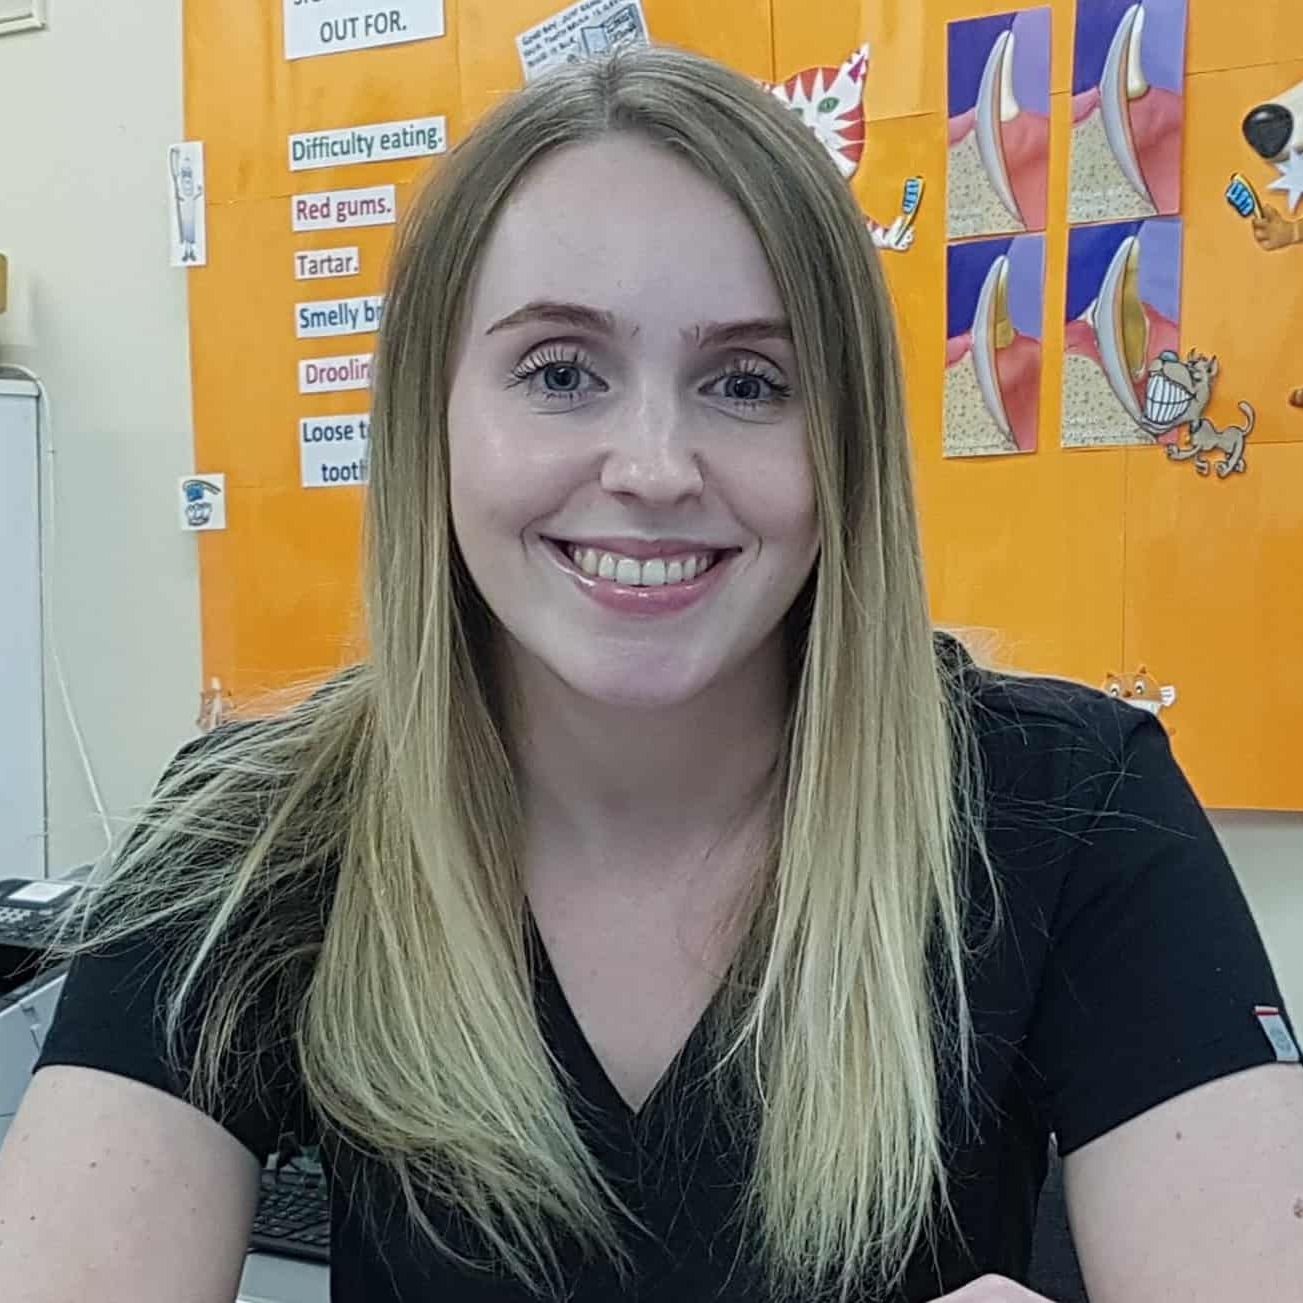 Rachel joined the reception team in June 2017 and works as a full-time receptionist at the Crossgates branch. She has a cocker spaniel called Mia and a hamster. In her spare time she enjoys days out to the seaside and long walks with Mia.